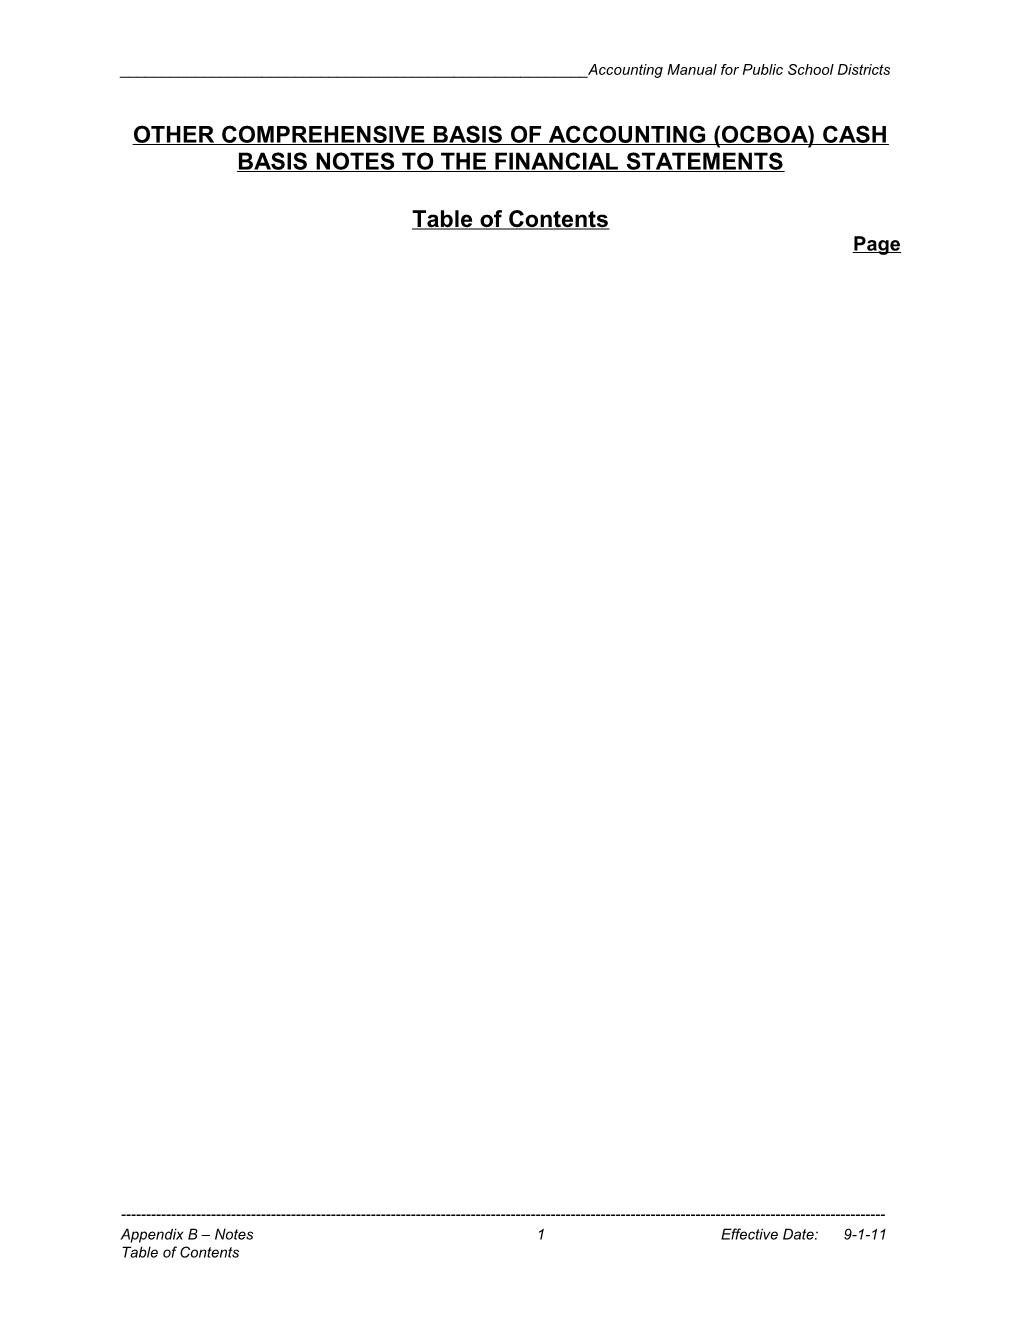 Other Comprehensive Basis of Accounting (Ocboa) Cash Basis Notes to the Financial Statements